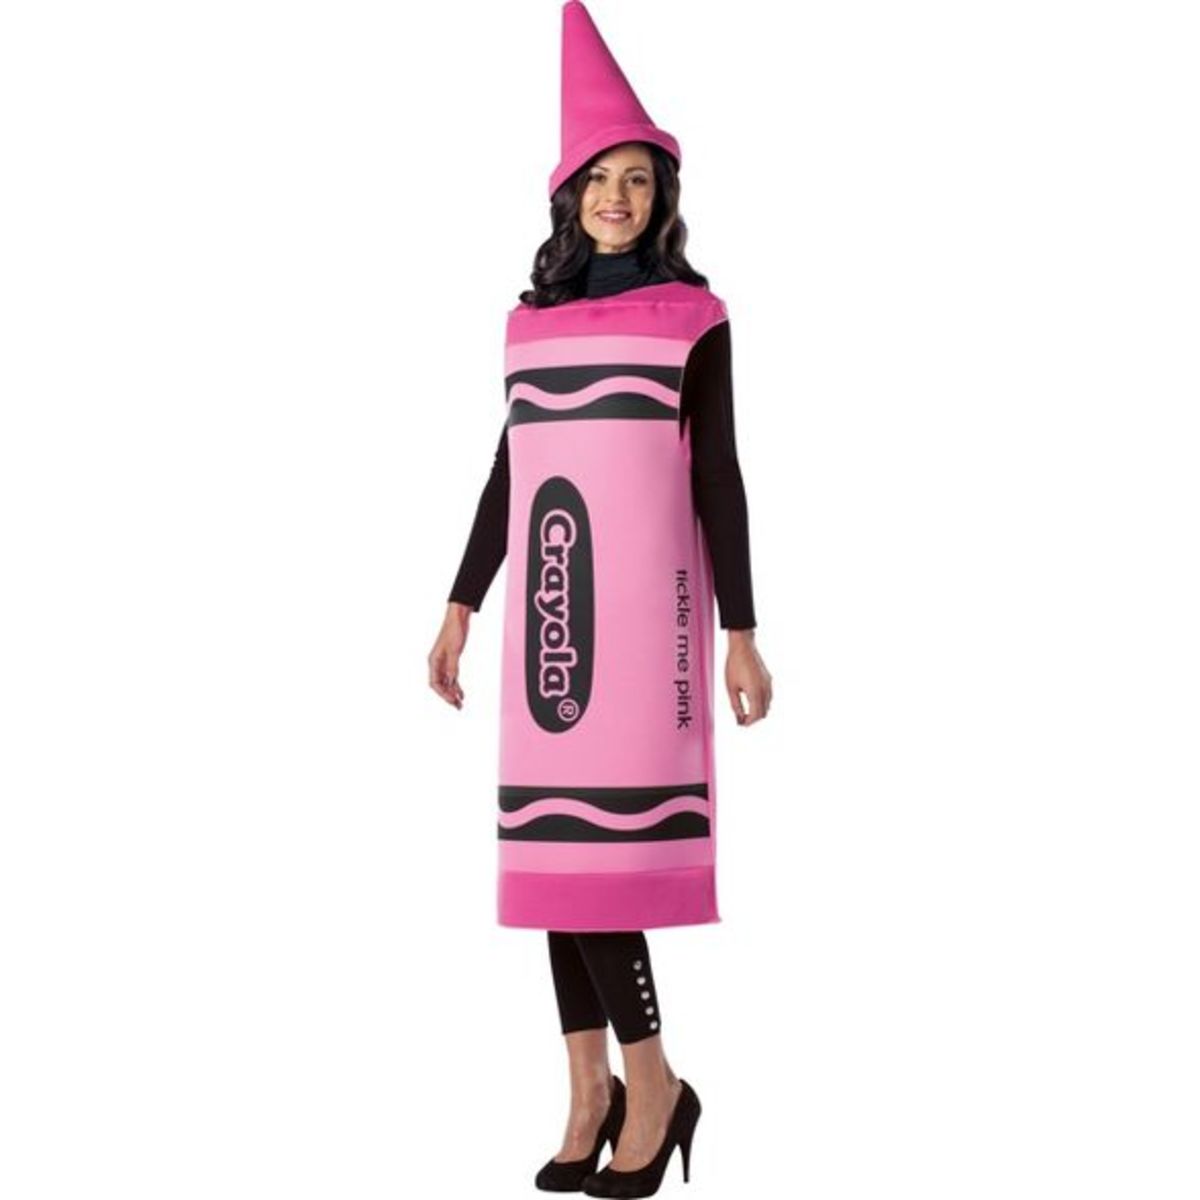 This costume can really bring some color to your life! 